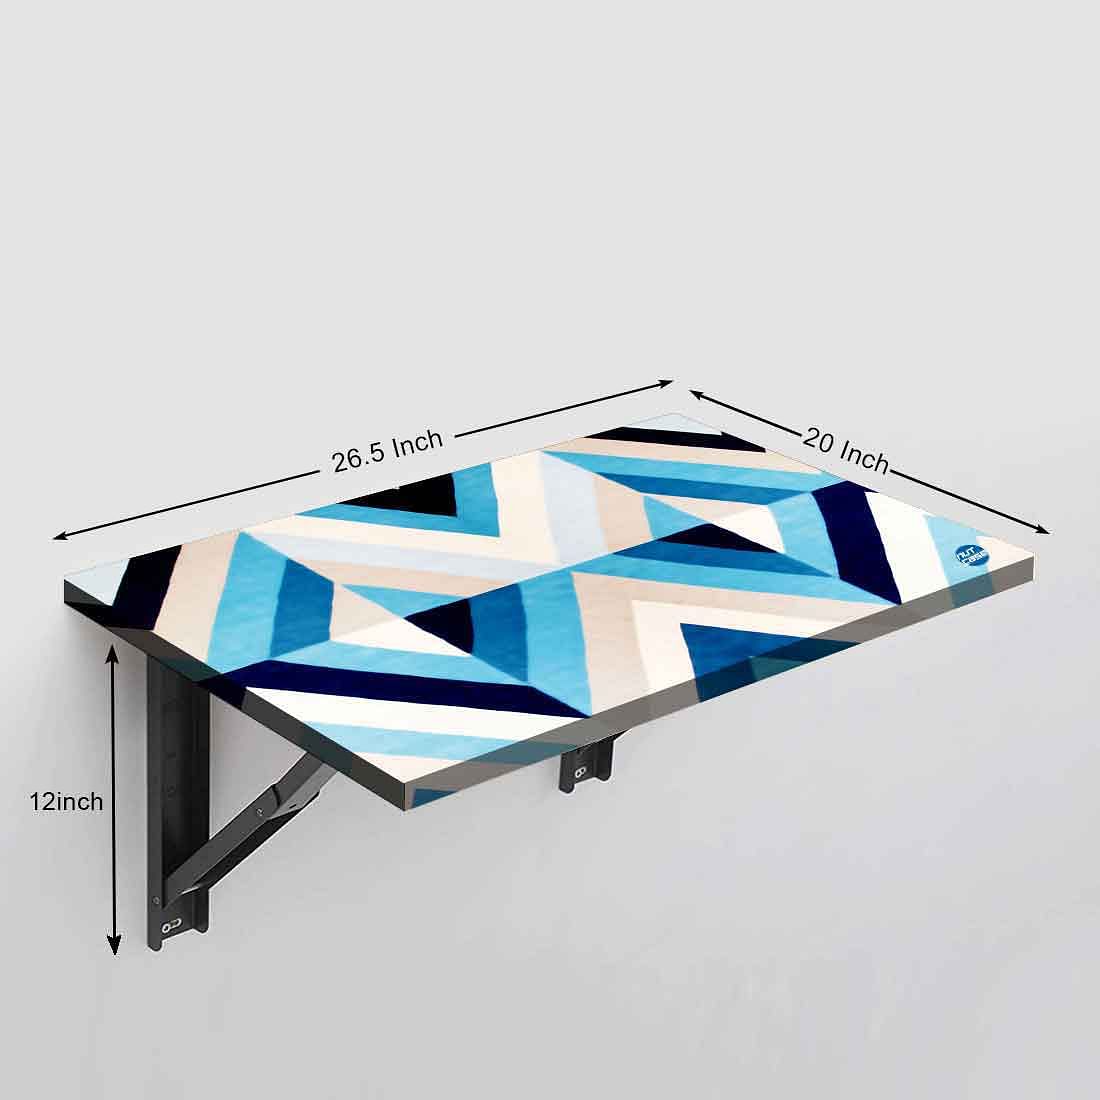 Wall Mounted Study Table for Work From Home - Blue Lines Nutcase